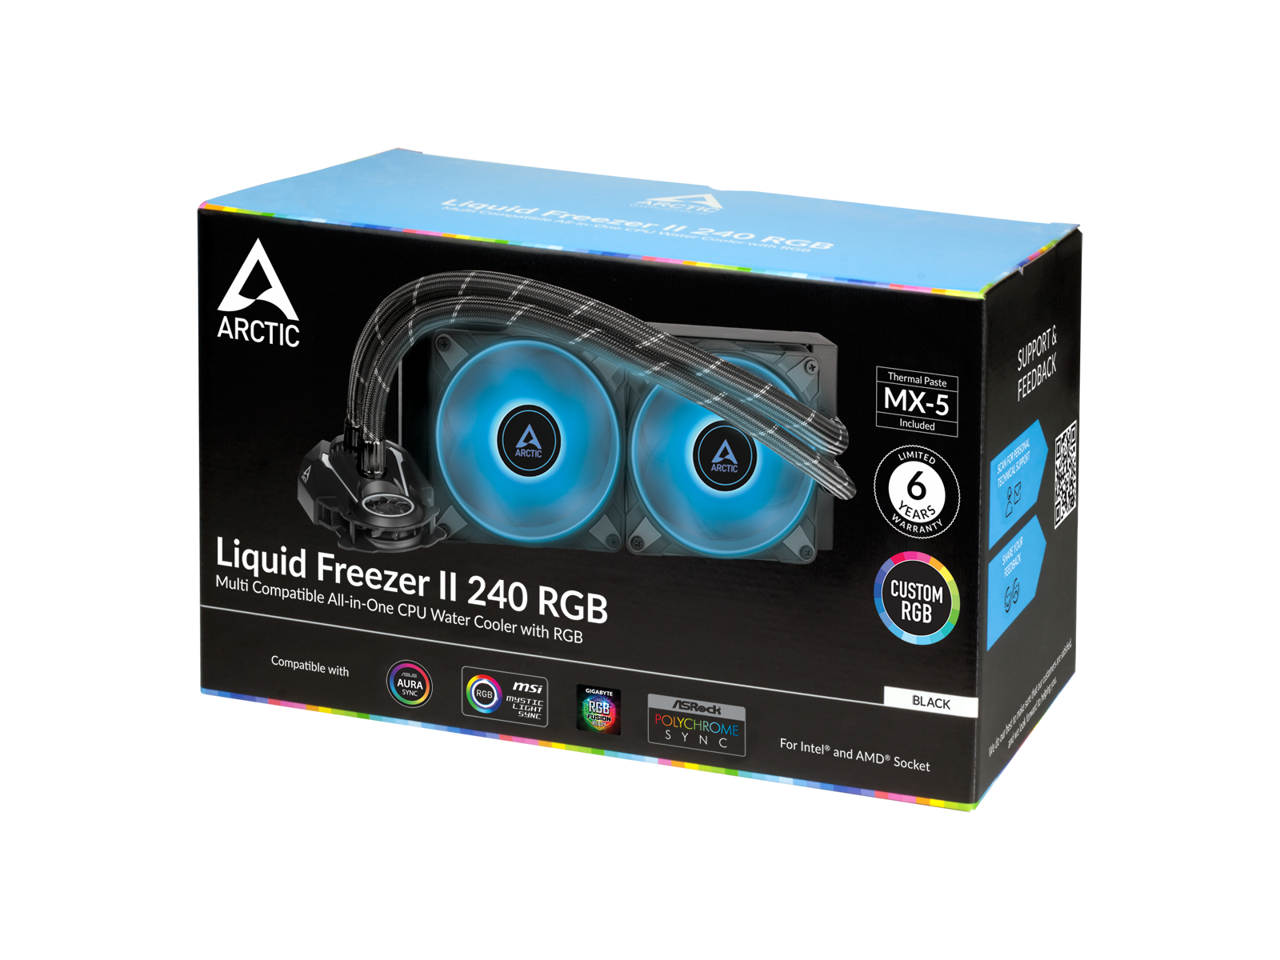 ARCTIC ACFRE00098A Liquid Freezer II 240 RGB - Multi-Compatible All-in-one CPU AIO Water Cooler with RGB, Compatible with Intel & AMD, efficient PWM-Controlled Pump, Fan Speed: 200-1800 RPM - Black